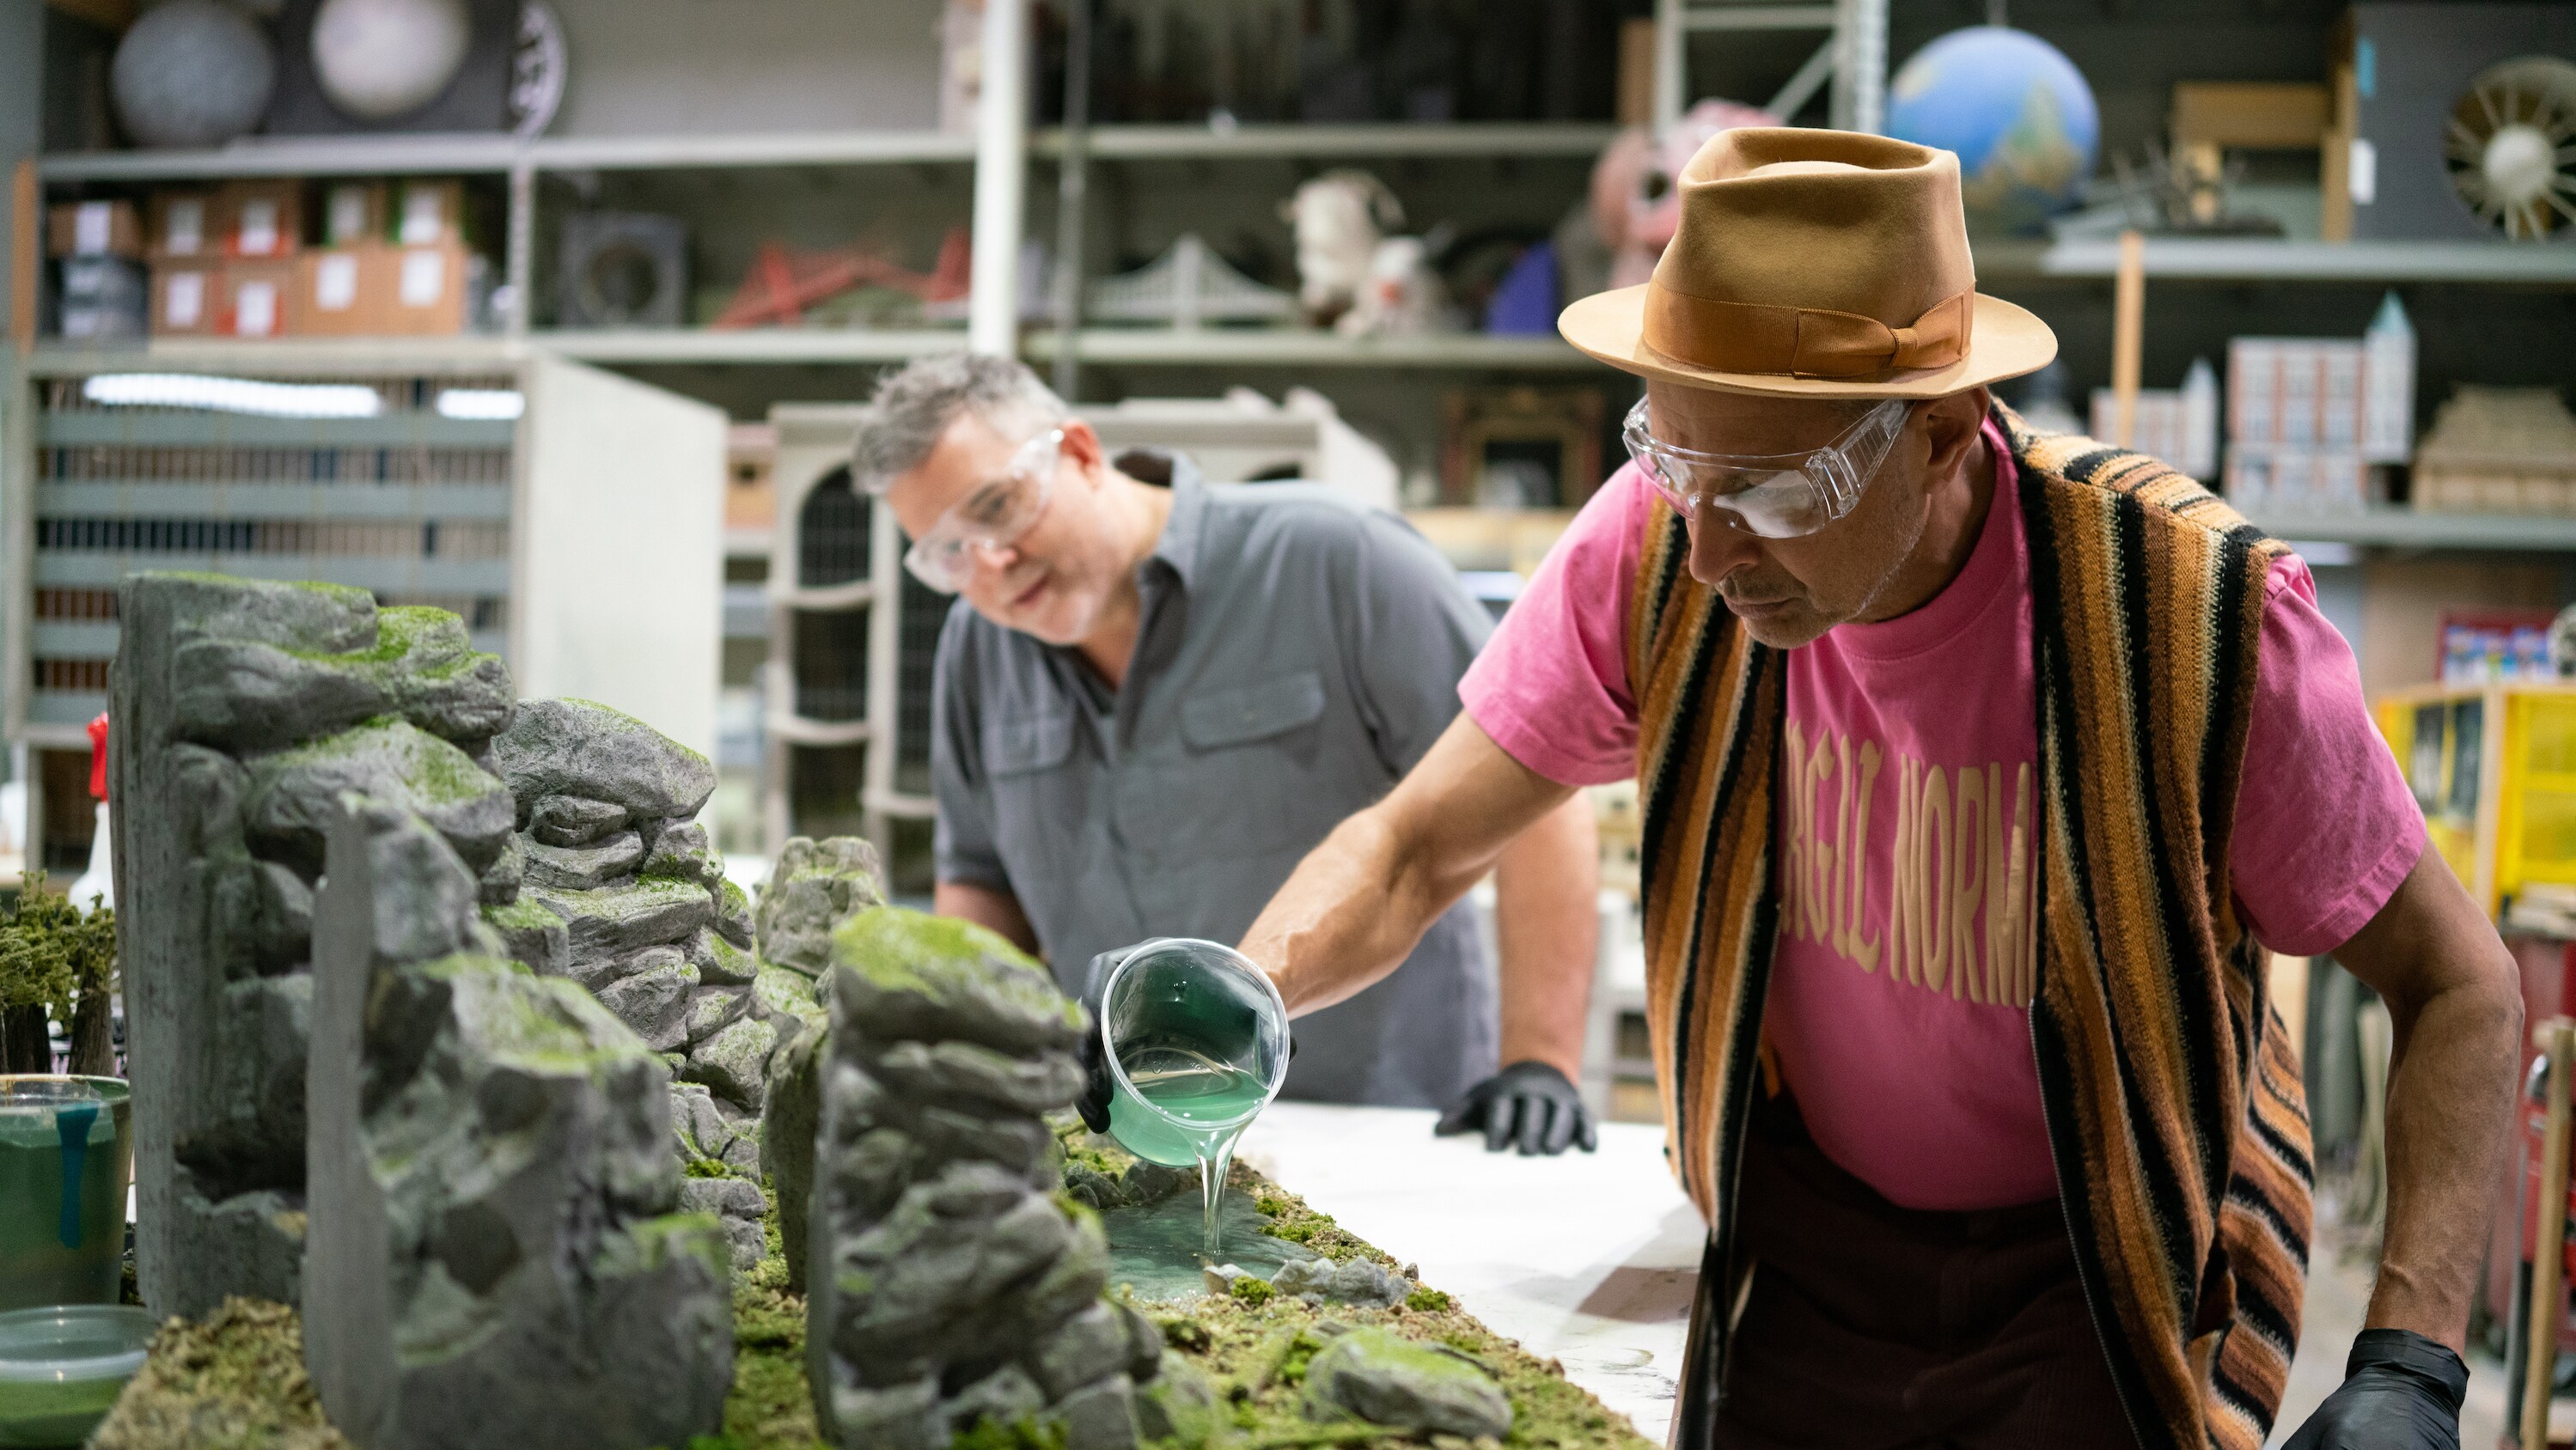 San Diego, CA - Jeff Goldblum (R) making a model scene with Carl Horner from Vision Scenery. (Credit: National Geographic)